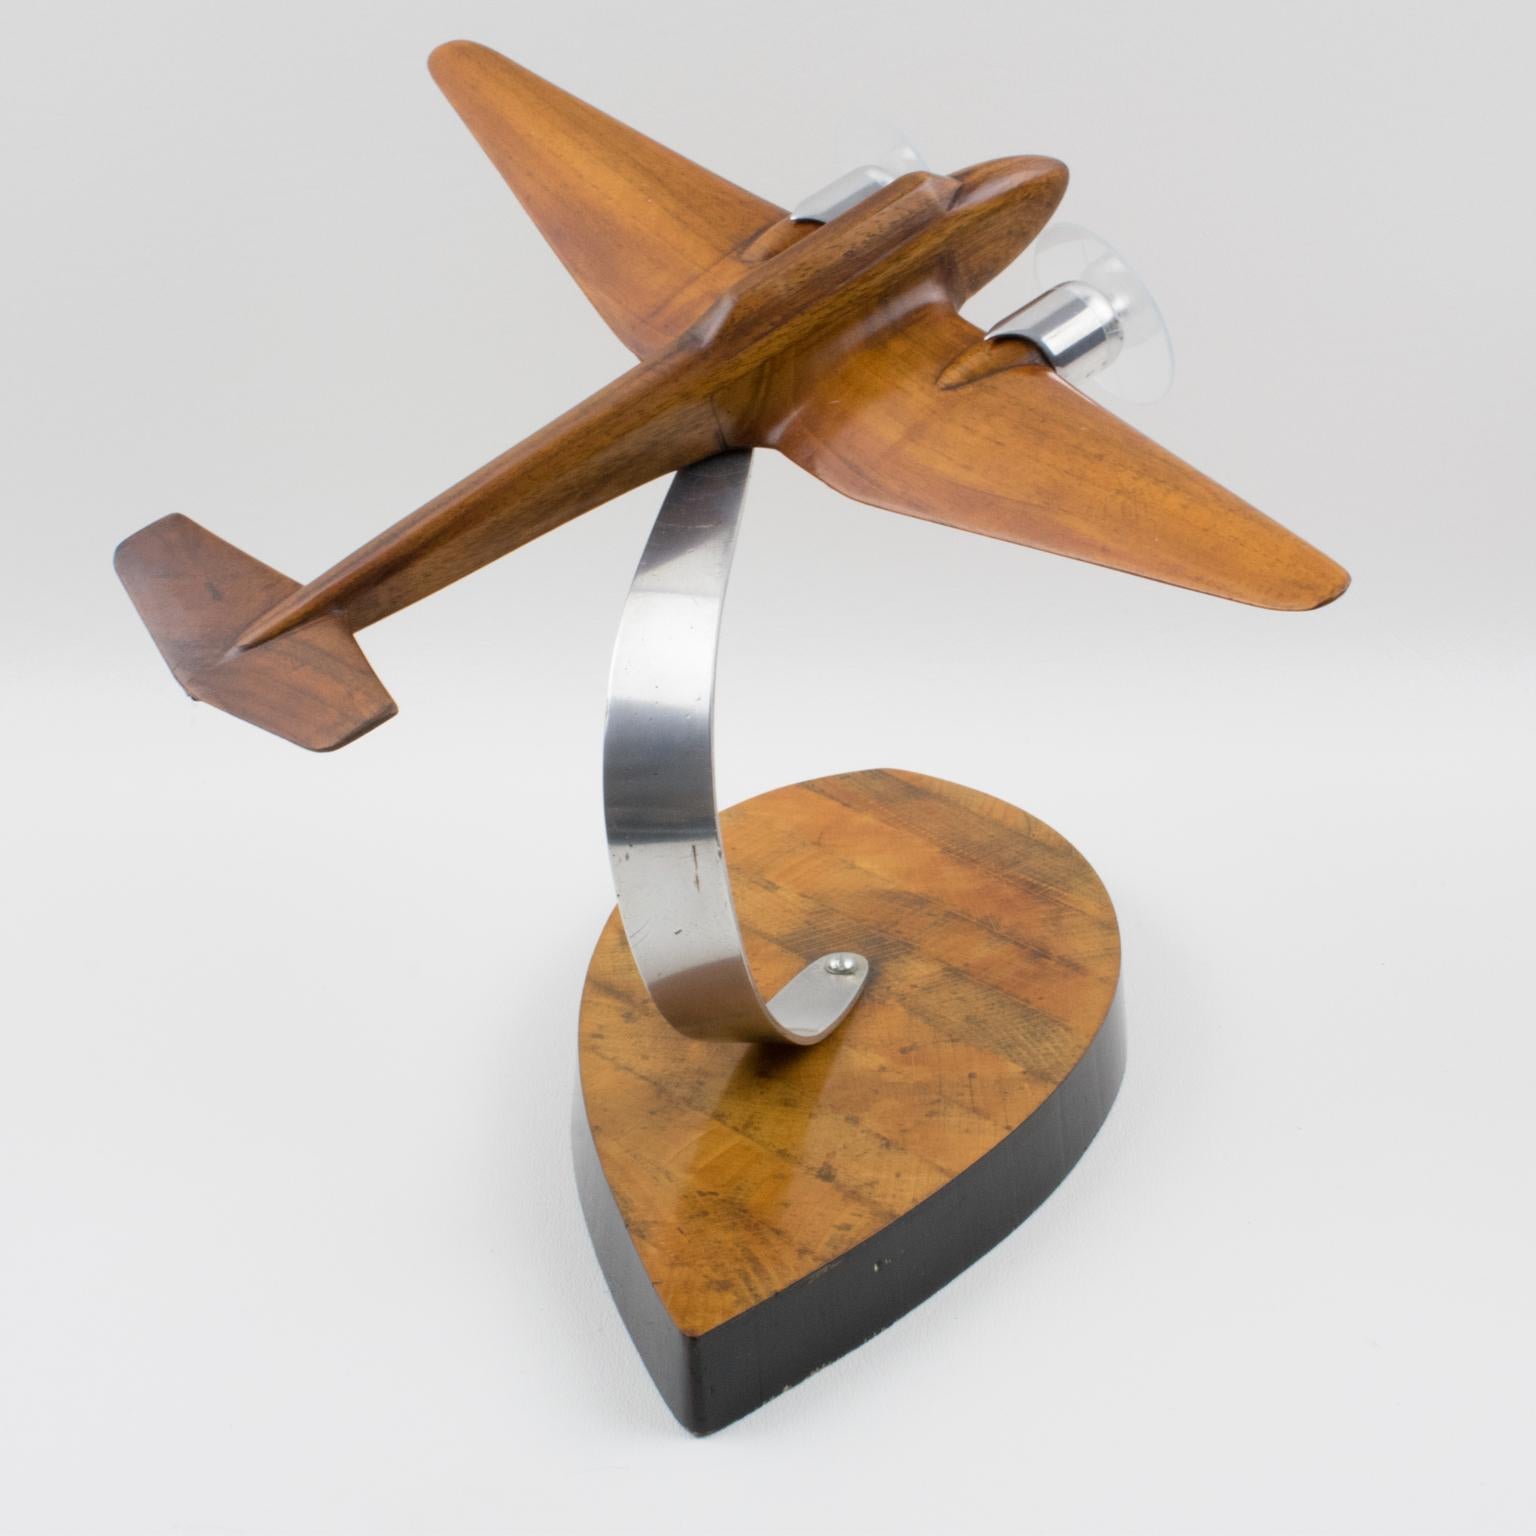 French Art Deco, 1940s Wooden and Aluminum Airplane Aviation Model 1